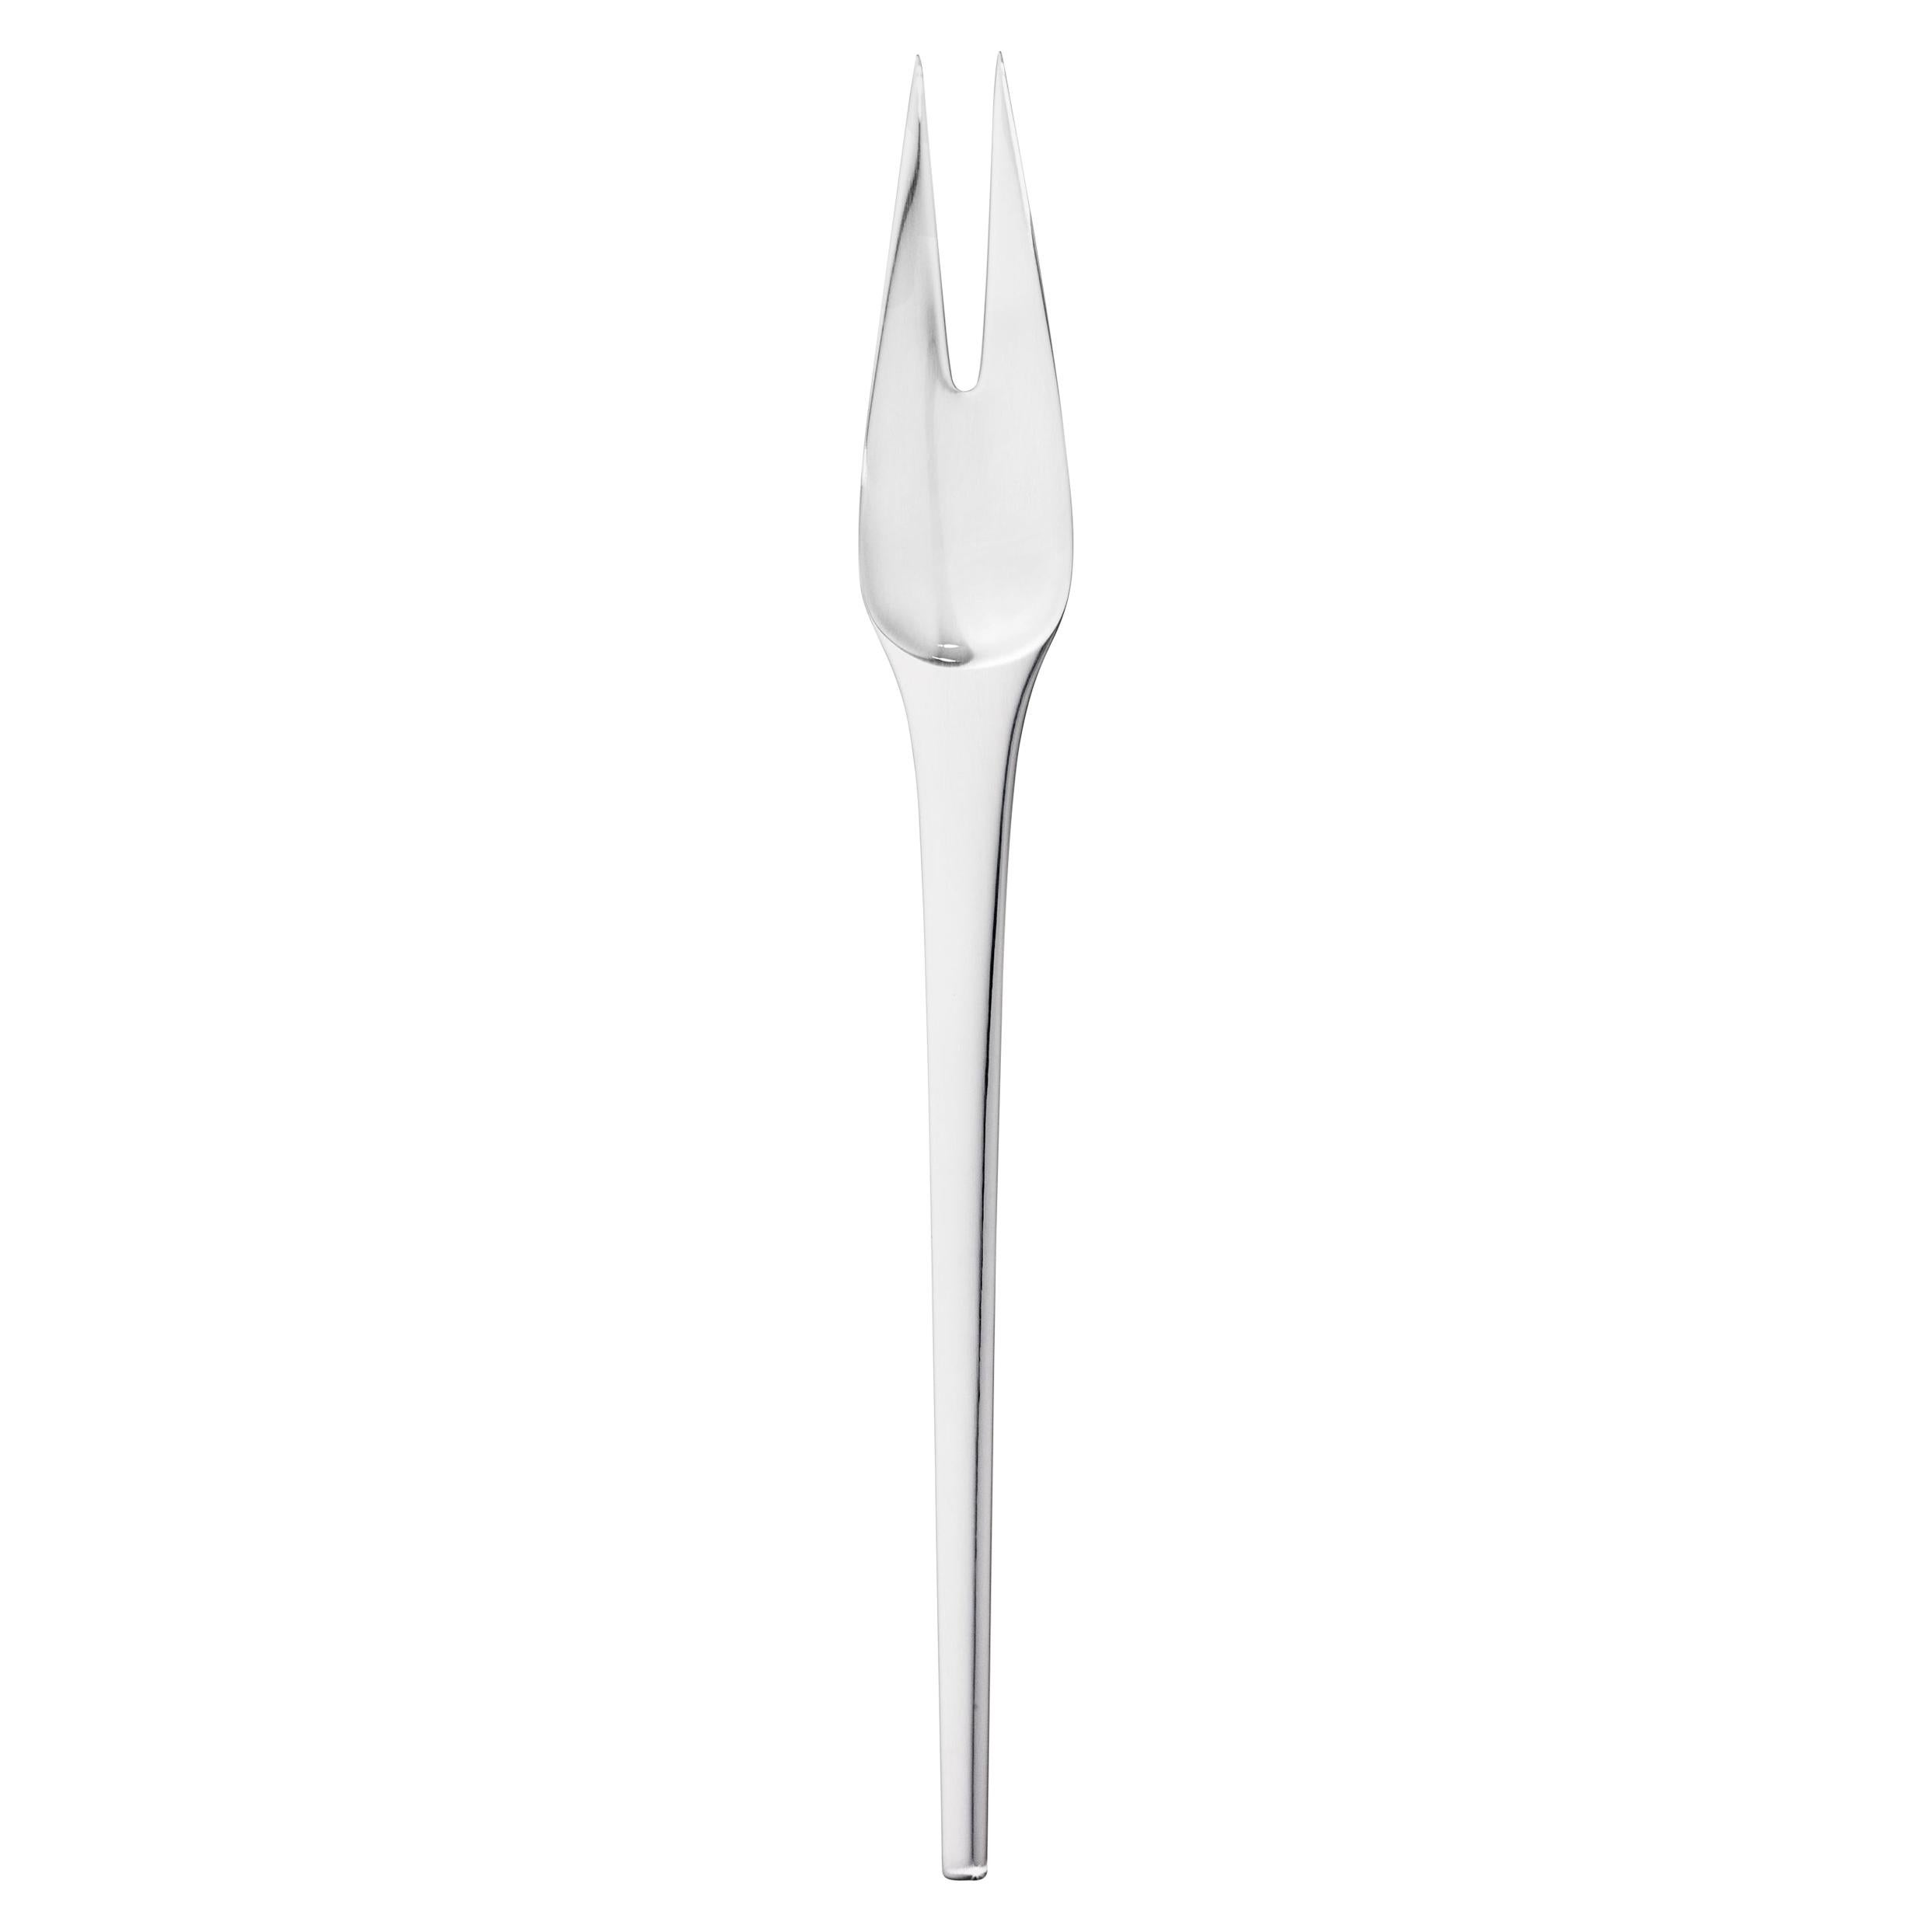 Henning Koppel Sterling Silver Caravel Meat Fork with 2 Tines for Georg Jensen For Sale